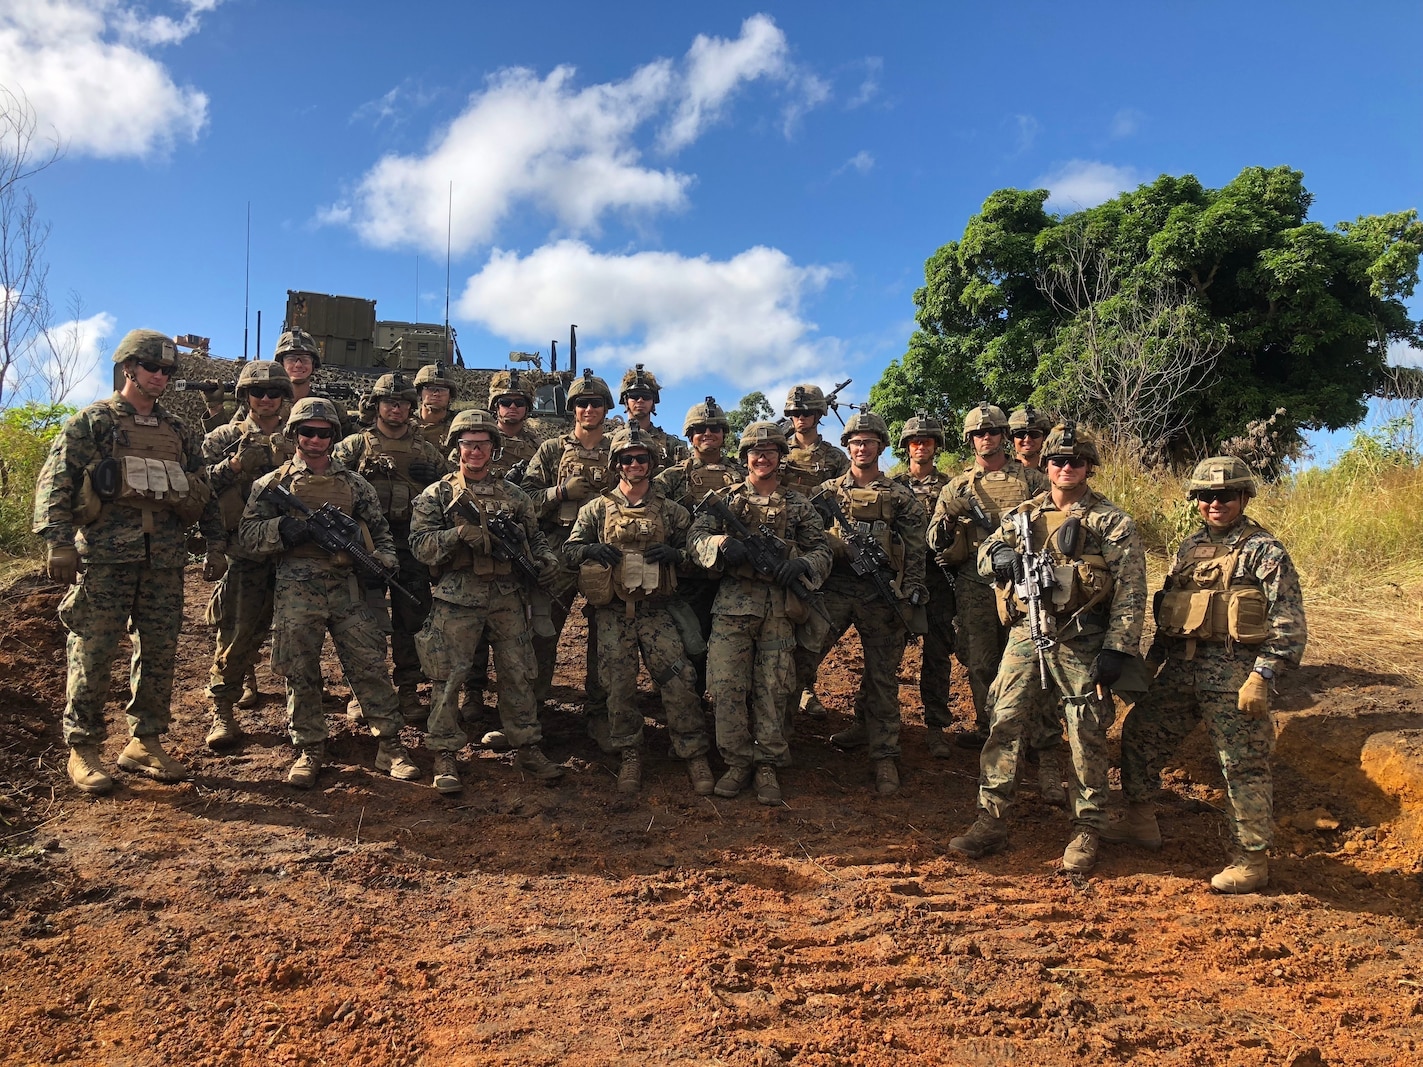 U.S. Marines Lt. Col. Warren C. Cook, Commanding Officer and SgtMaj Jose H. Molina, Sergeant Major for 2nd Battalion 4th Marines take a photo with Weapons Platoon while visiting Company F at Shoal Water Bay Training Area during Diamond Strike on May 30, 2018.